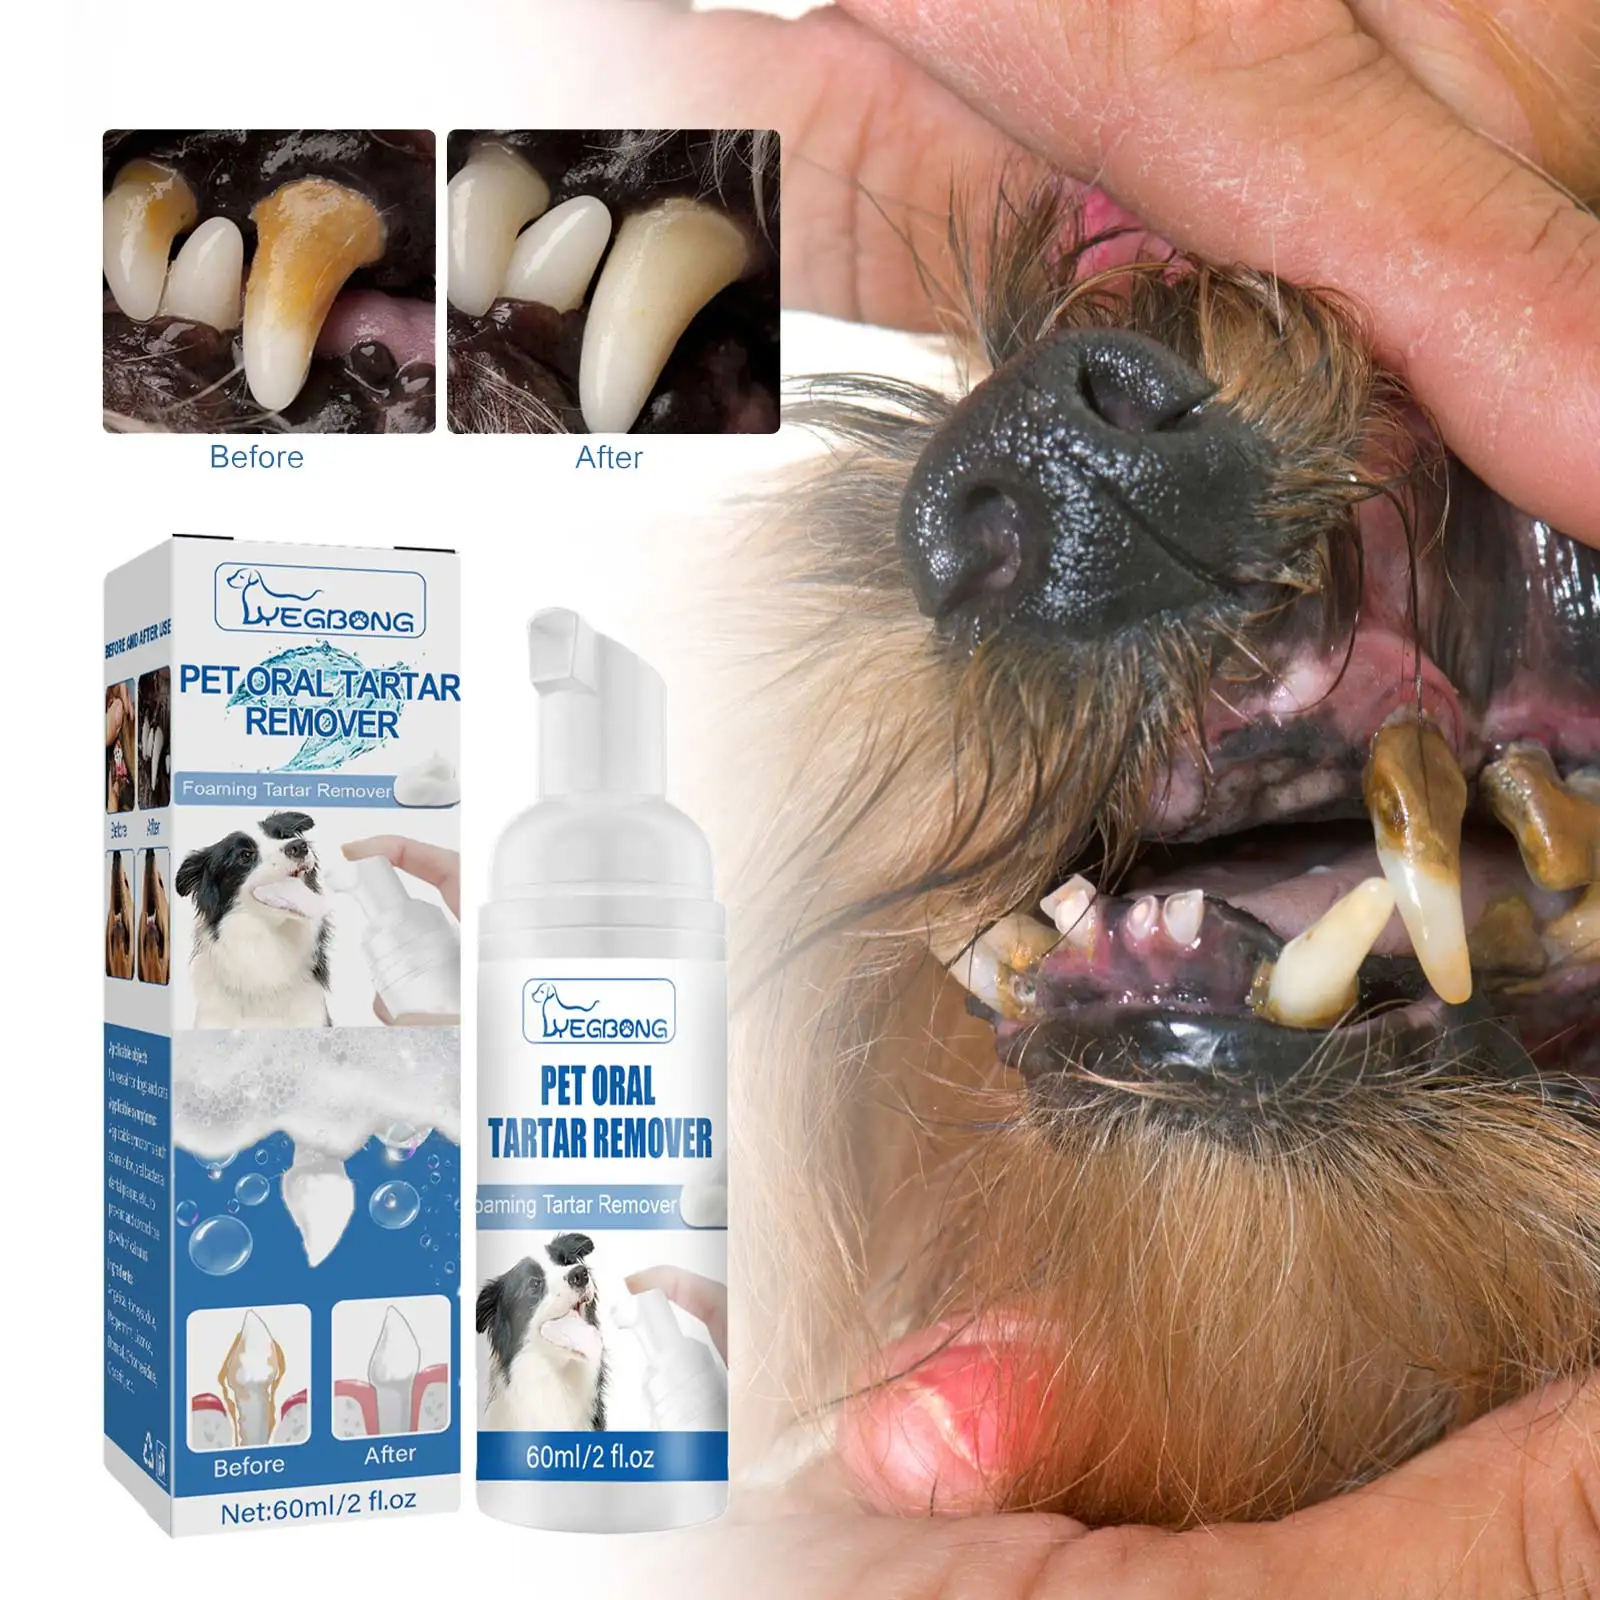 

Pet Oral Spray Dental Dirt Remover Cat Teeth Cleaning Breath Freshener Remove Dog Plaque Bad Smell Mouth Harmless Healthy Care